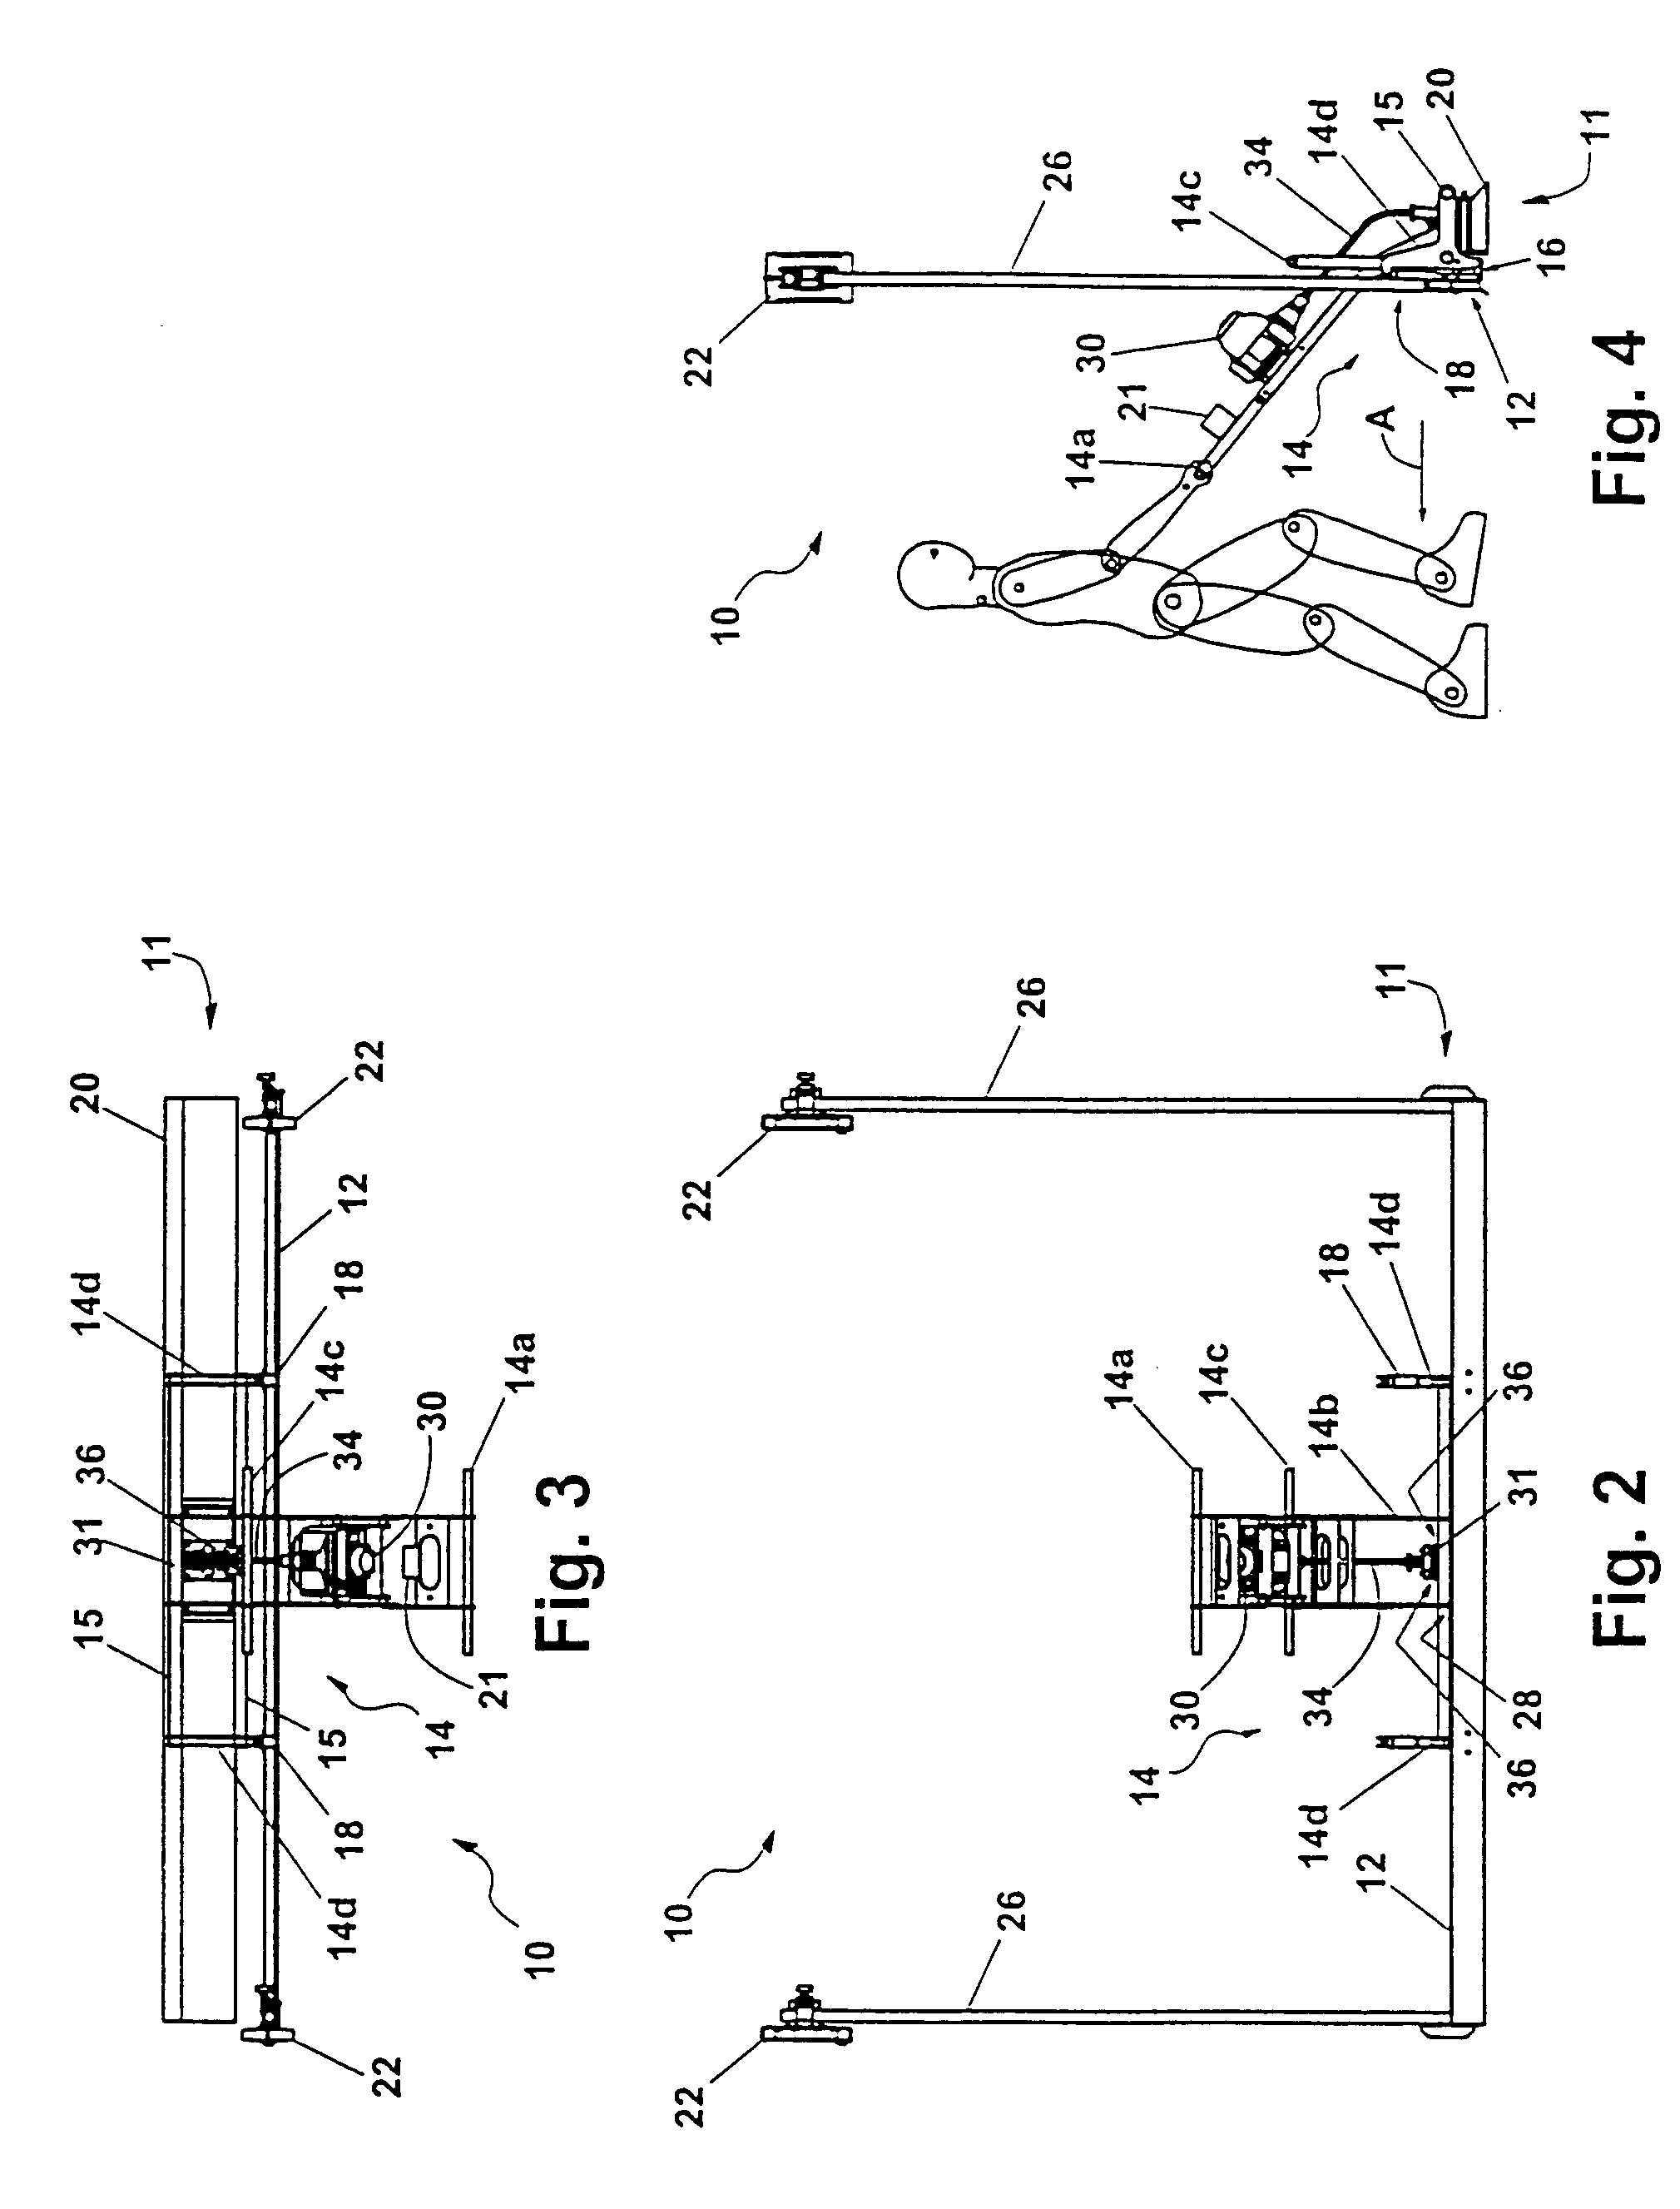 Apparatus for screeding uncured concrete surfaces